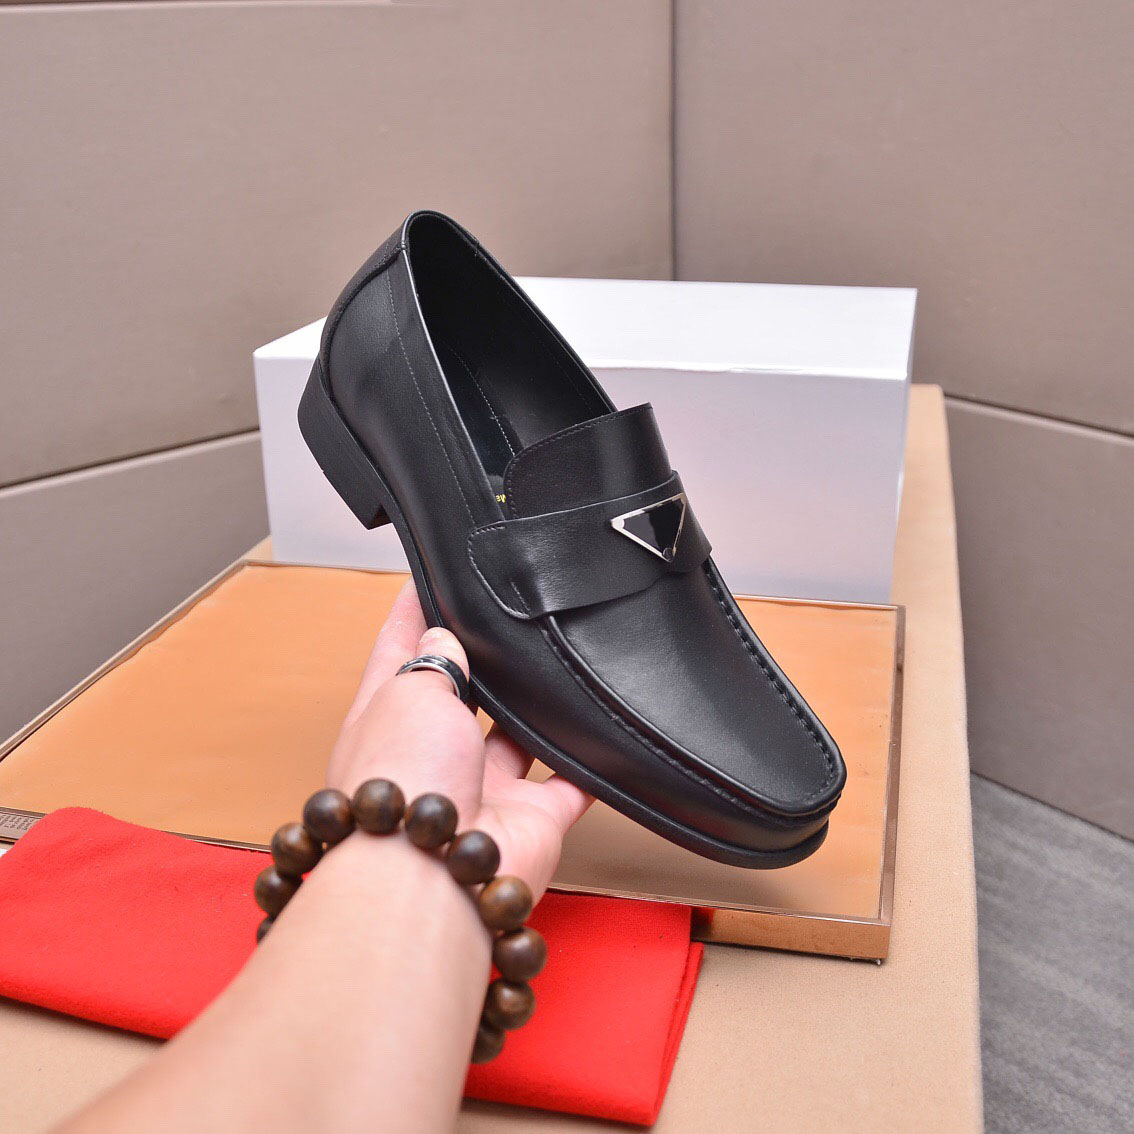 2023 Mens Party Wedding Dress Shoes Designer Business Oxfords Male Fashion Genuine Leather Formal Brand Work Flats Size 38-44